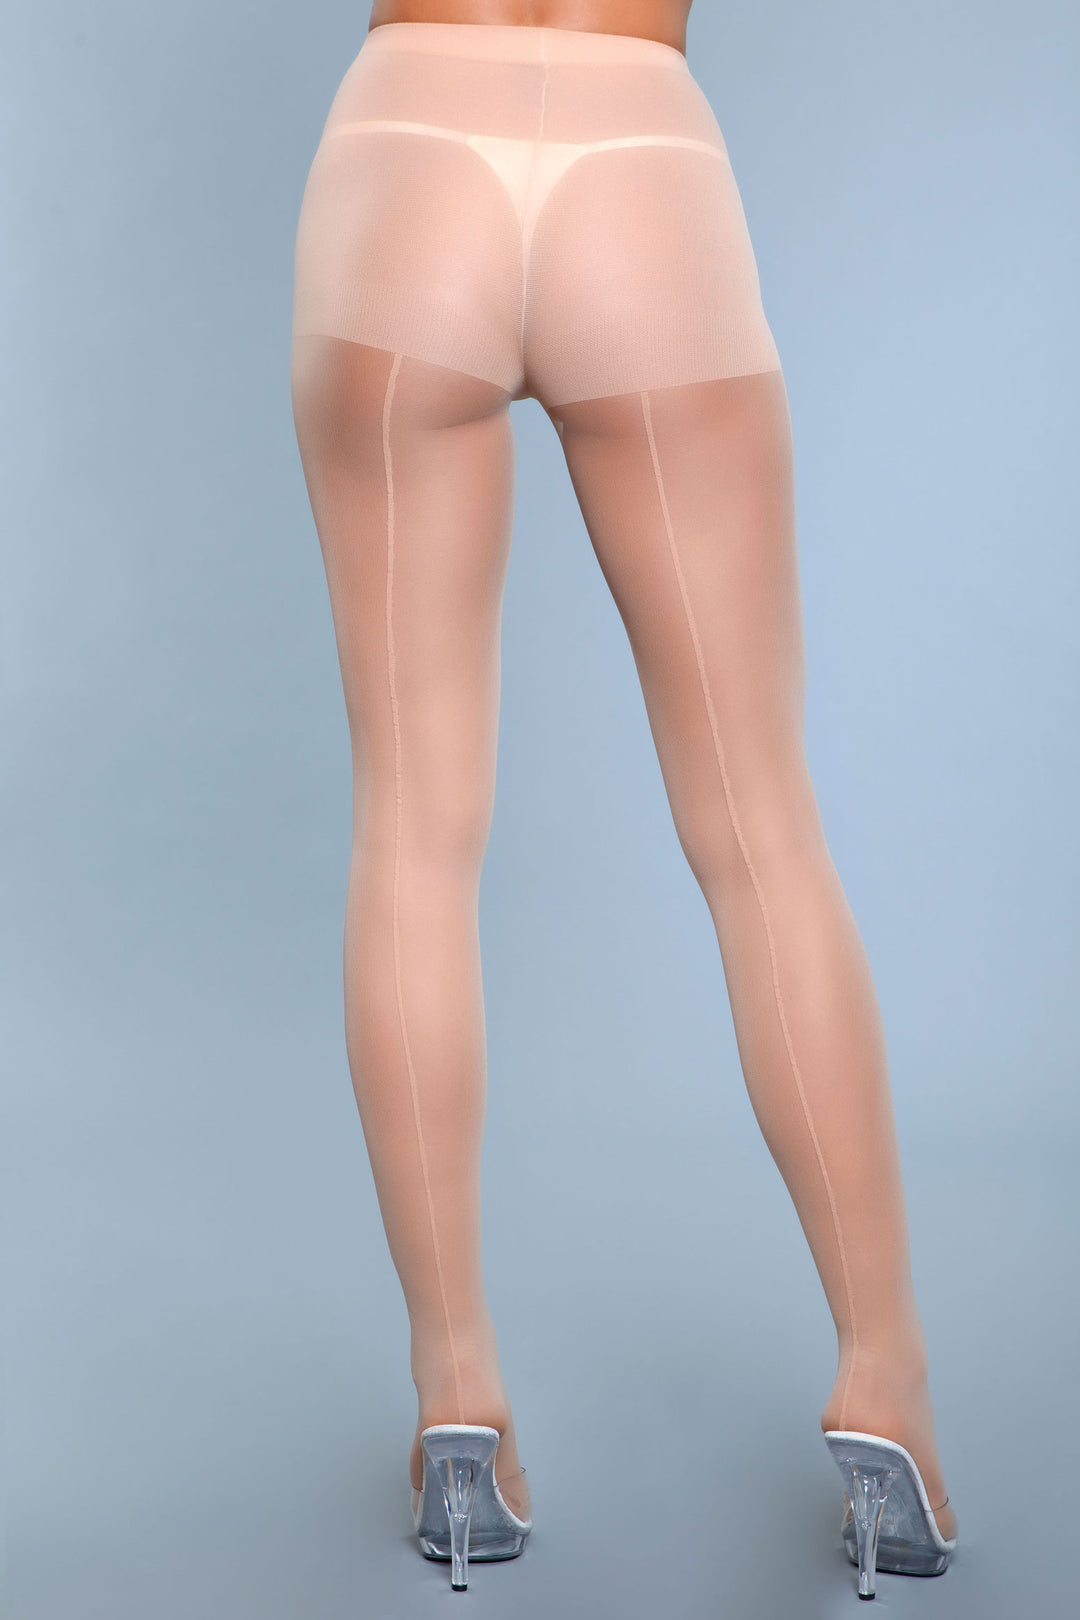 Model facing back wearing beige pantyhose with backseam up calves and thighs